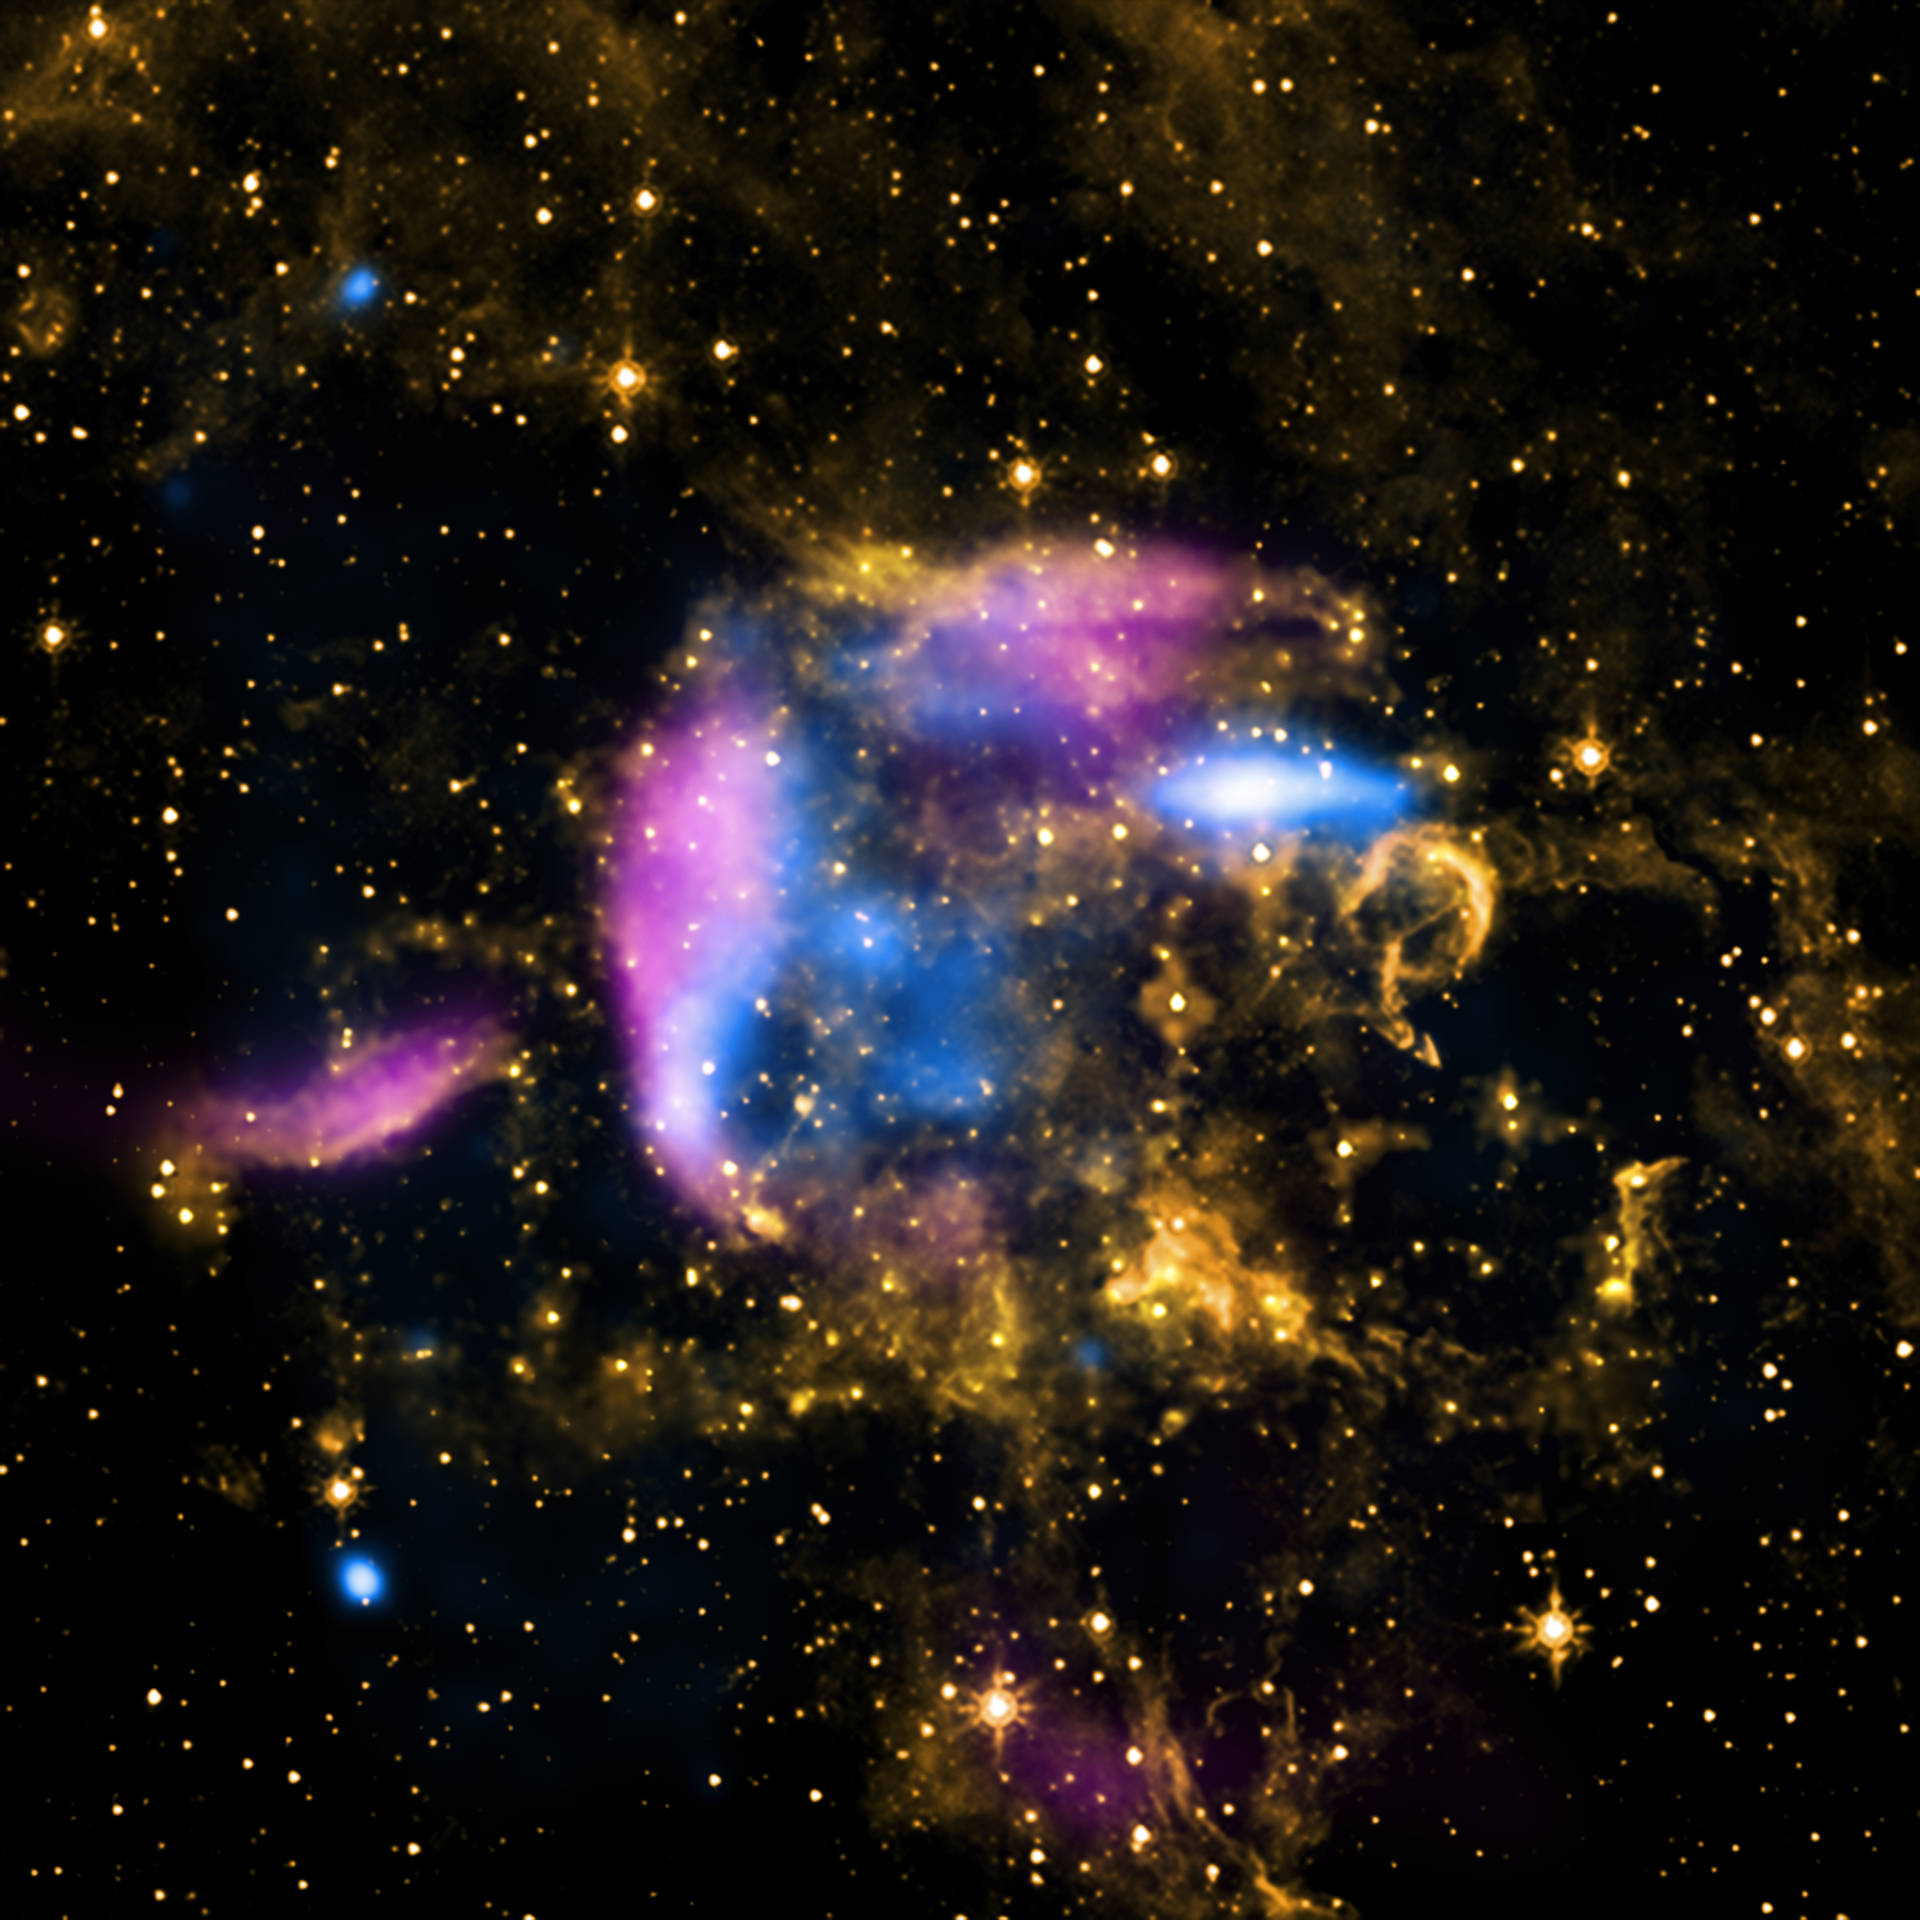 Colorful Supernova Remnant In Space Universal Wallpaper